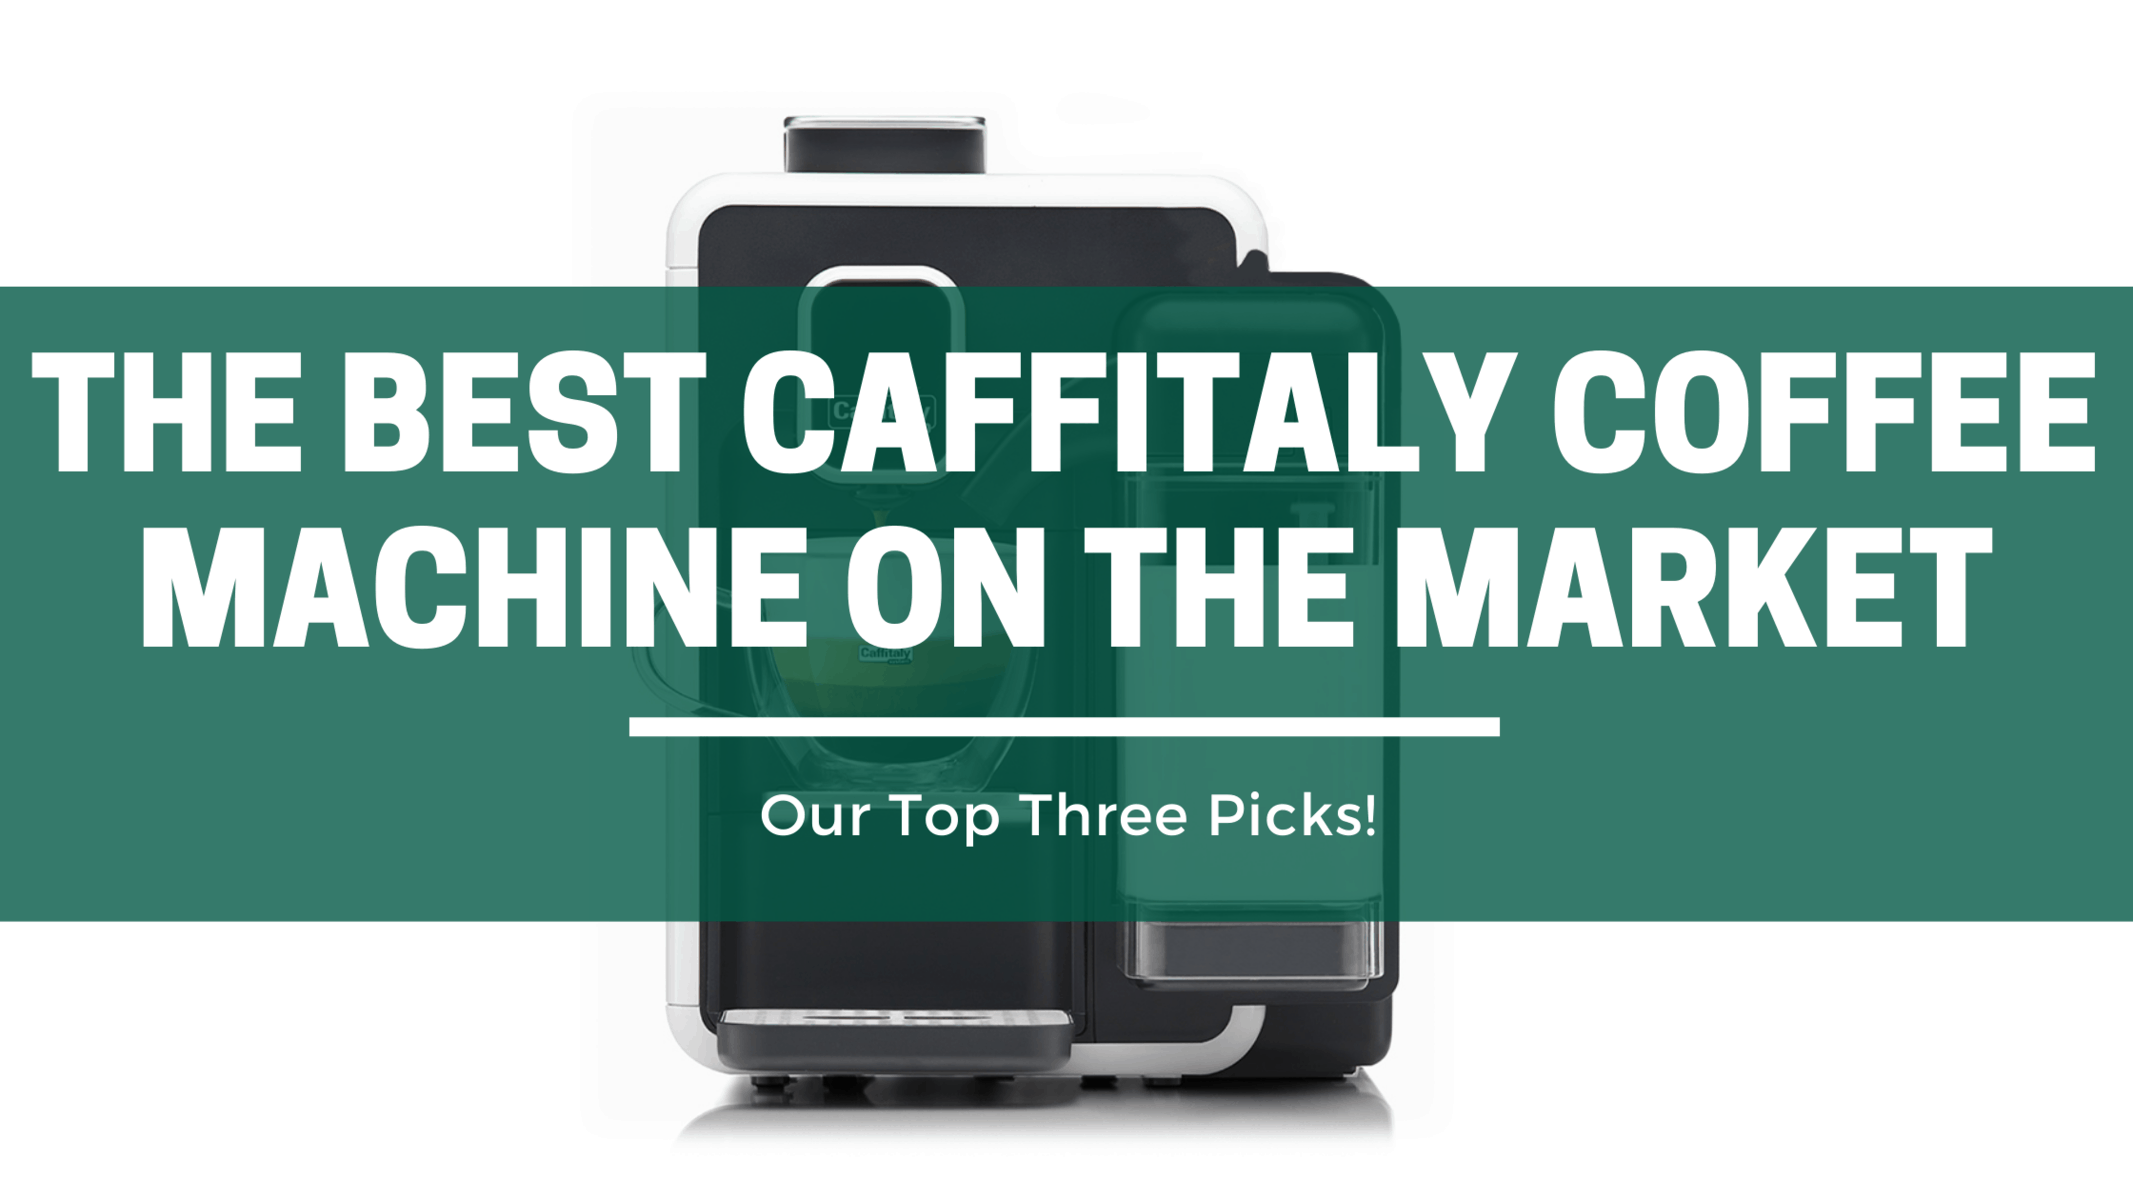 The Best caffitaly coffee machines on the market